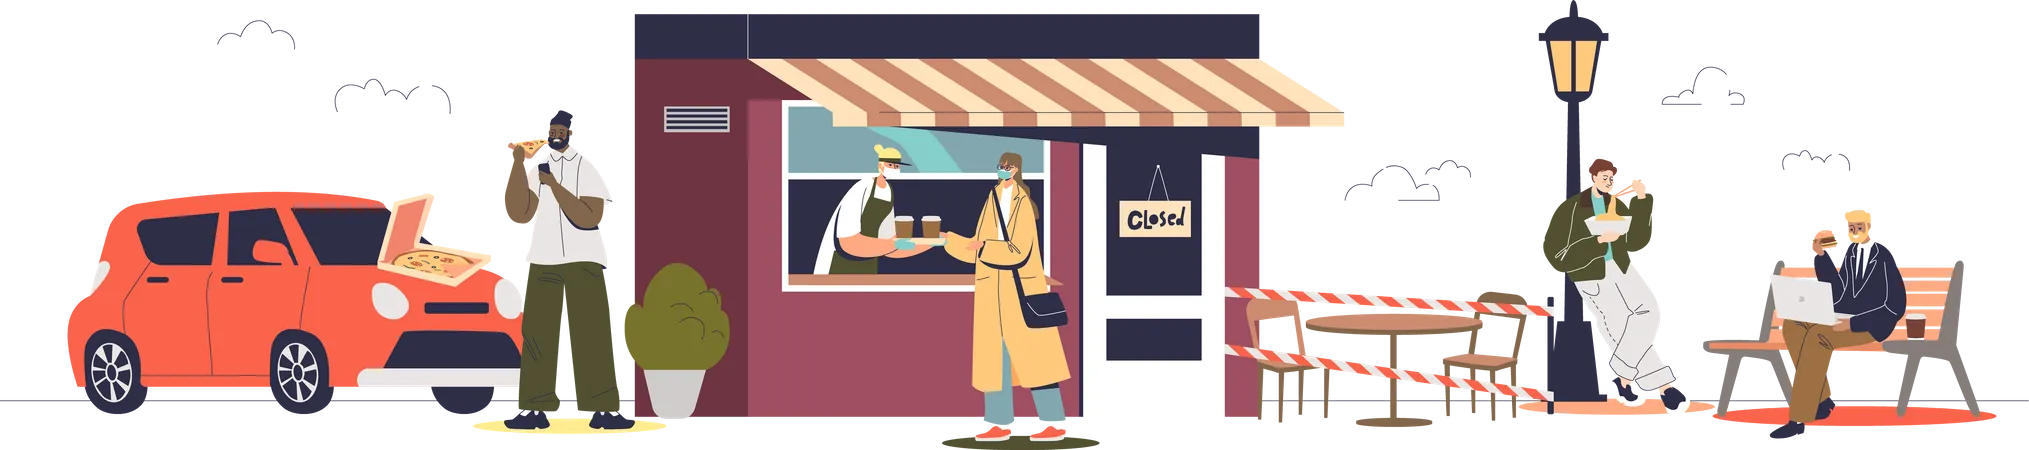 People buying takeaway food and beverages in cafe for covid protection and prevention Illustration